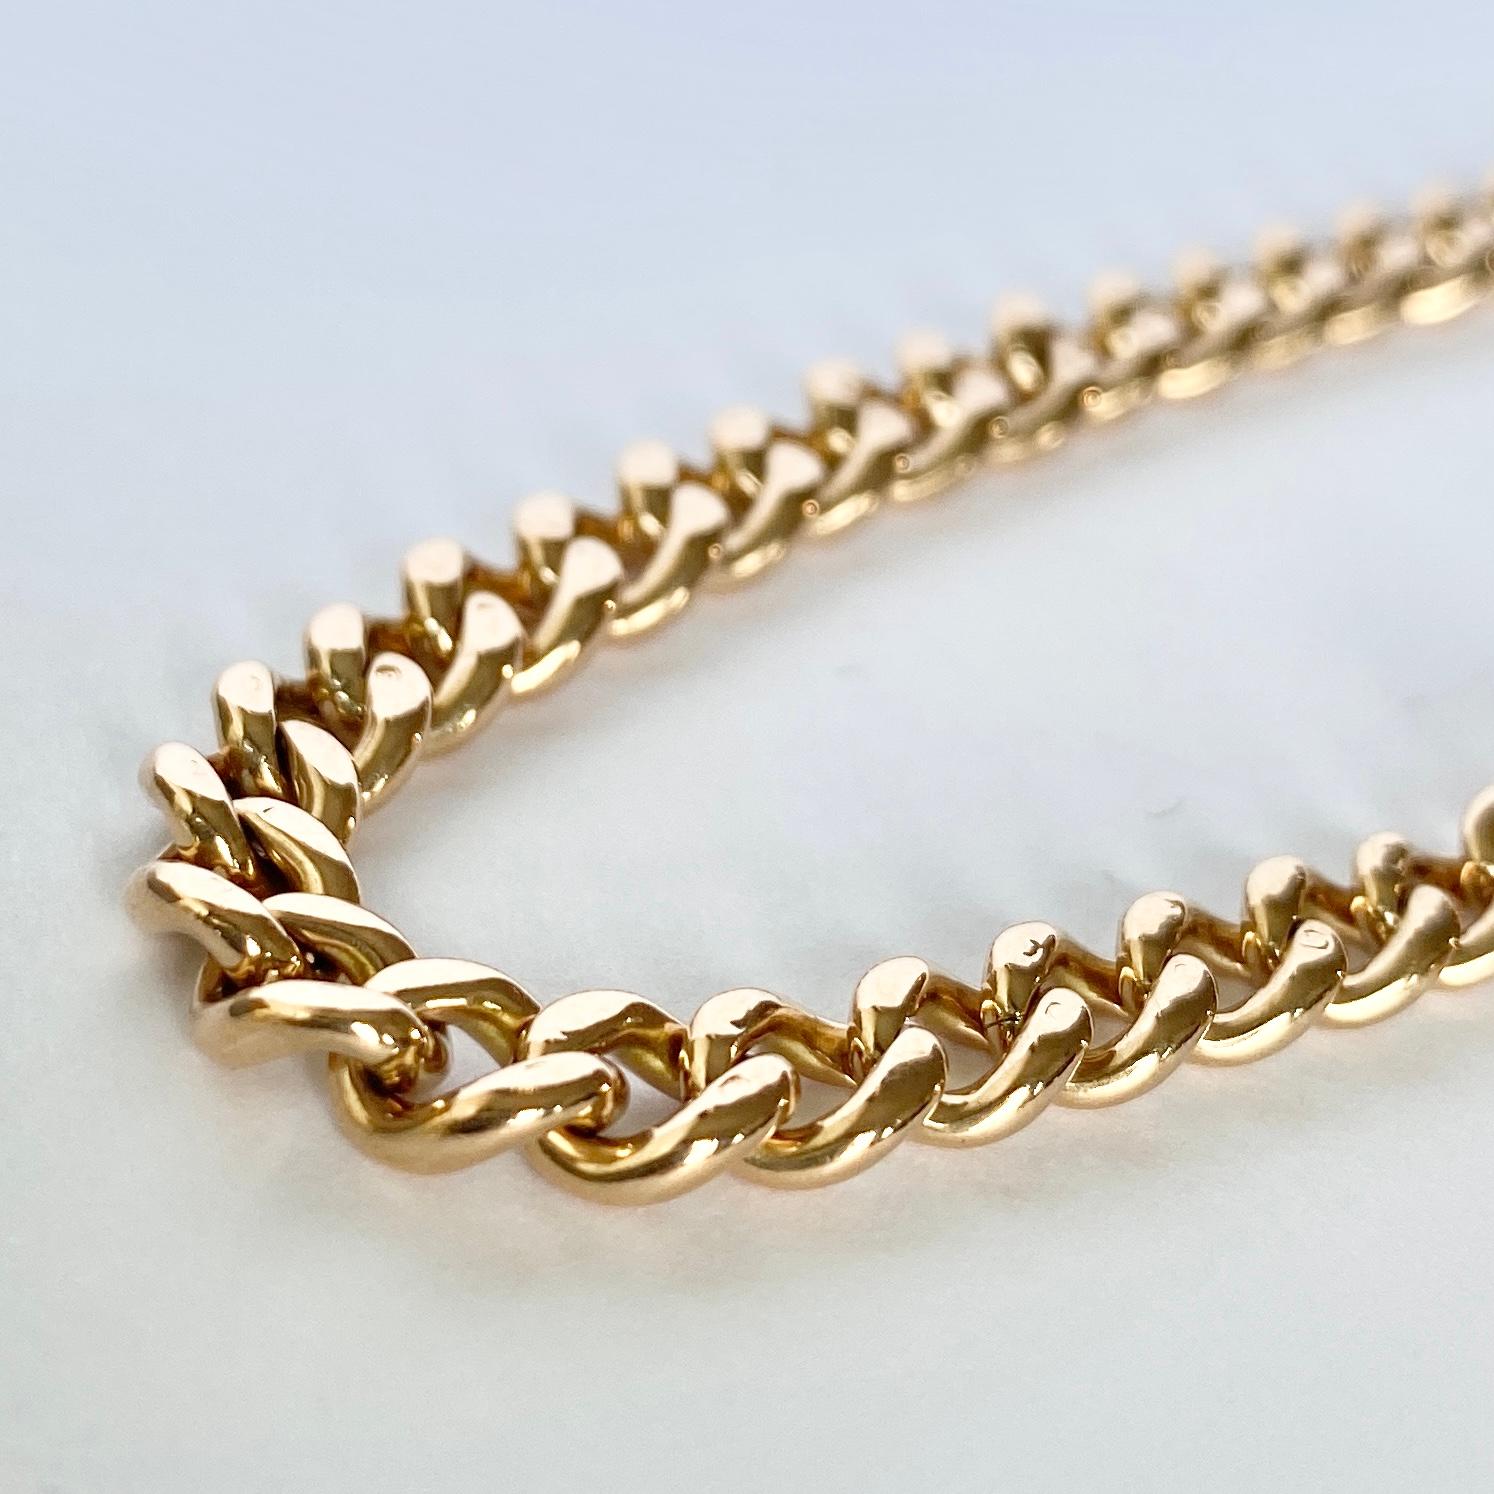 This is a classic curb bracelet modelled in 9ct rose gold and has a heart padlock as the method of fastening. 

Length: 19cm 
Chain Width: 7mm

Weight: 18g